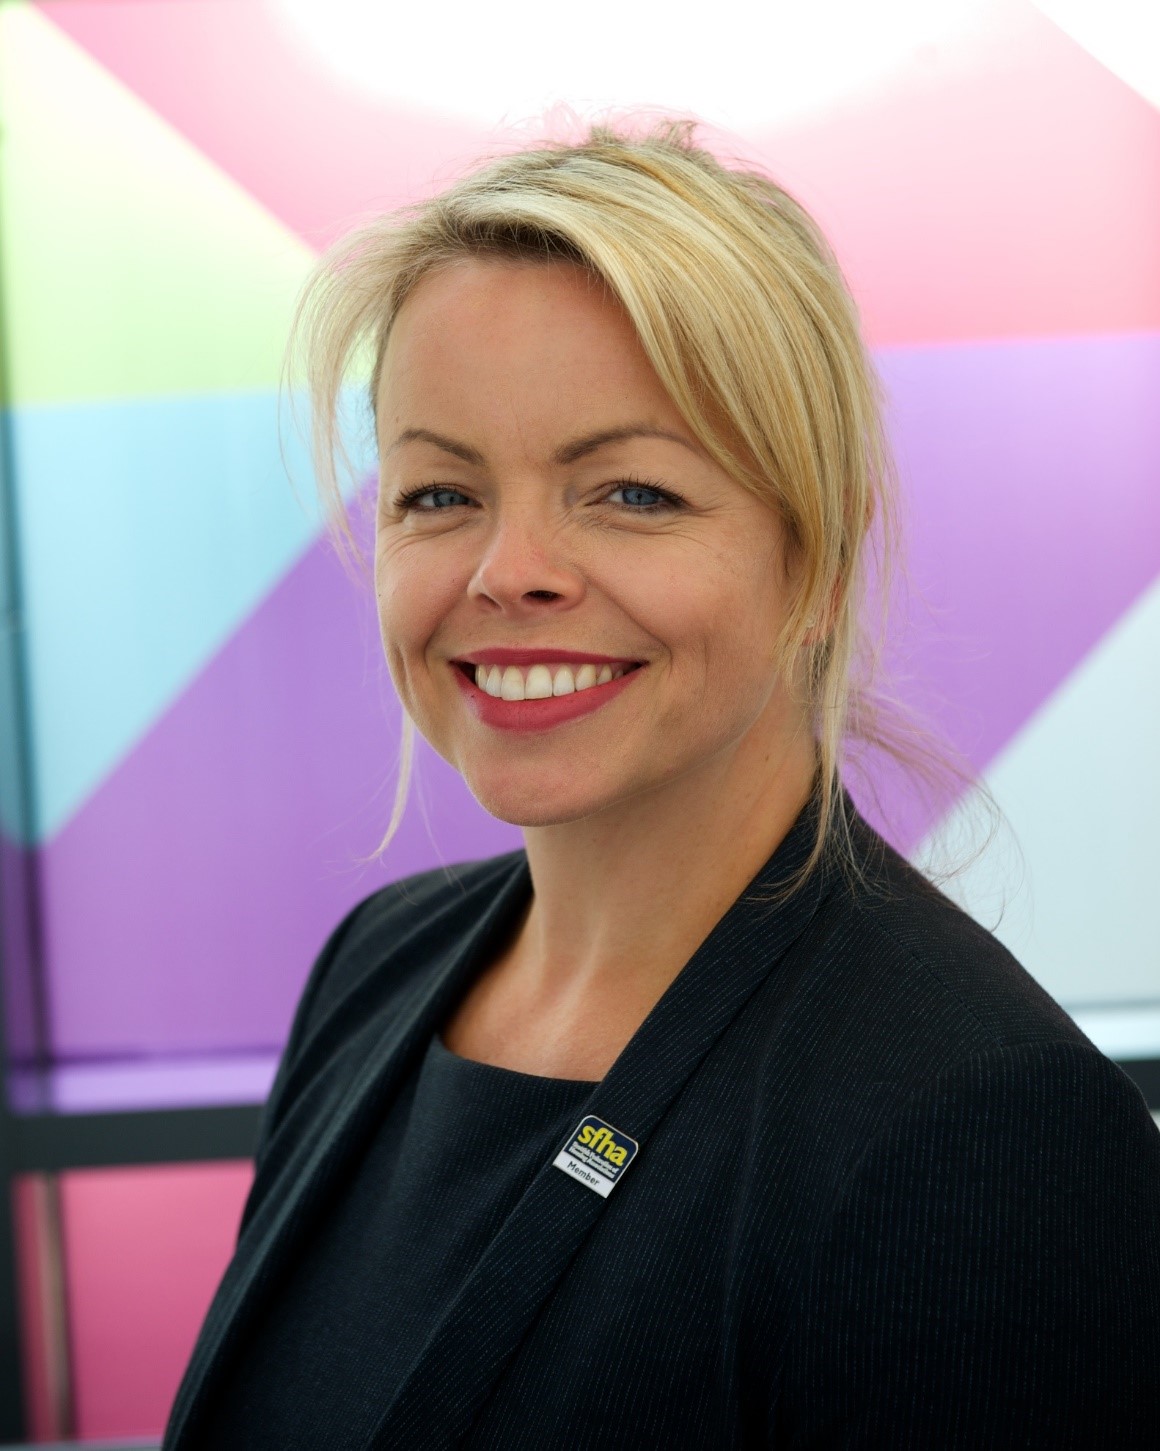 Thenue Housing appoints Lesley-Anne Junner as new head of finance